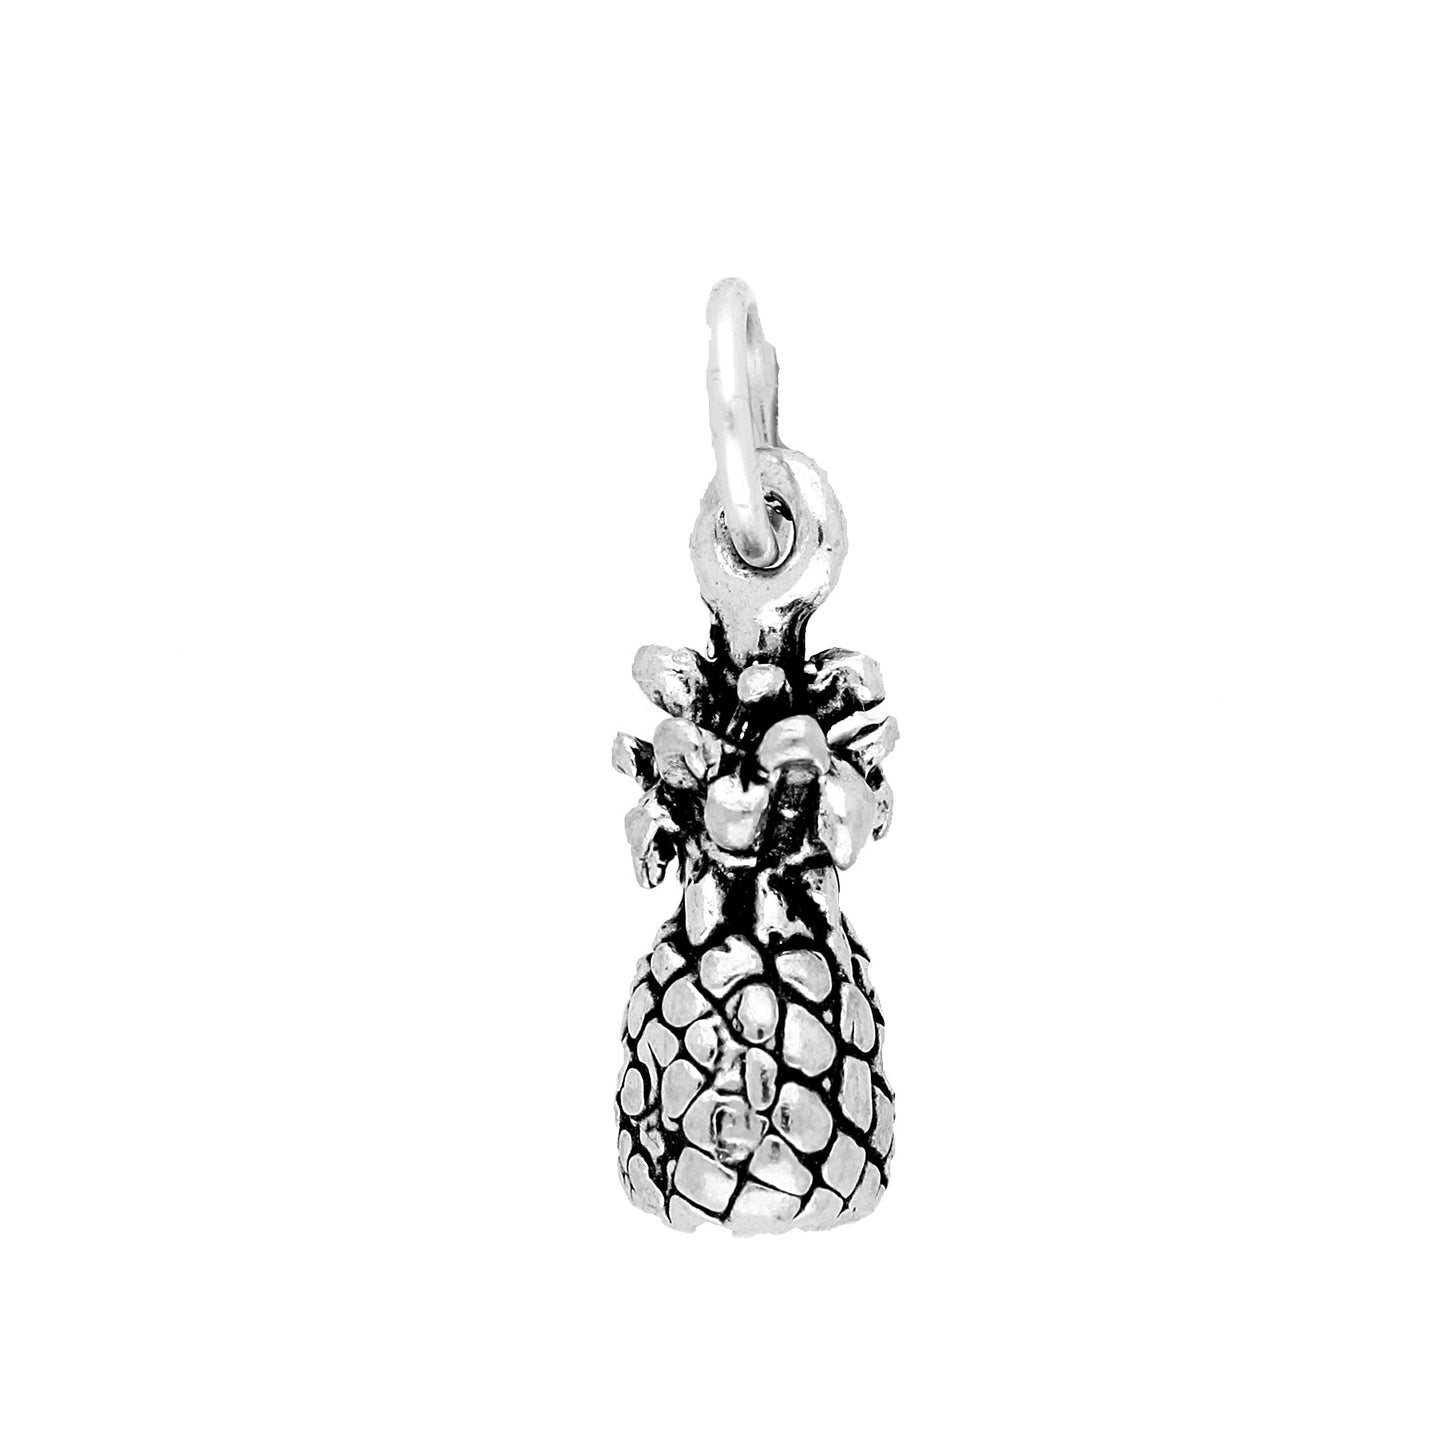 Sterling Silver Pineapple Charm